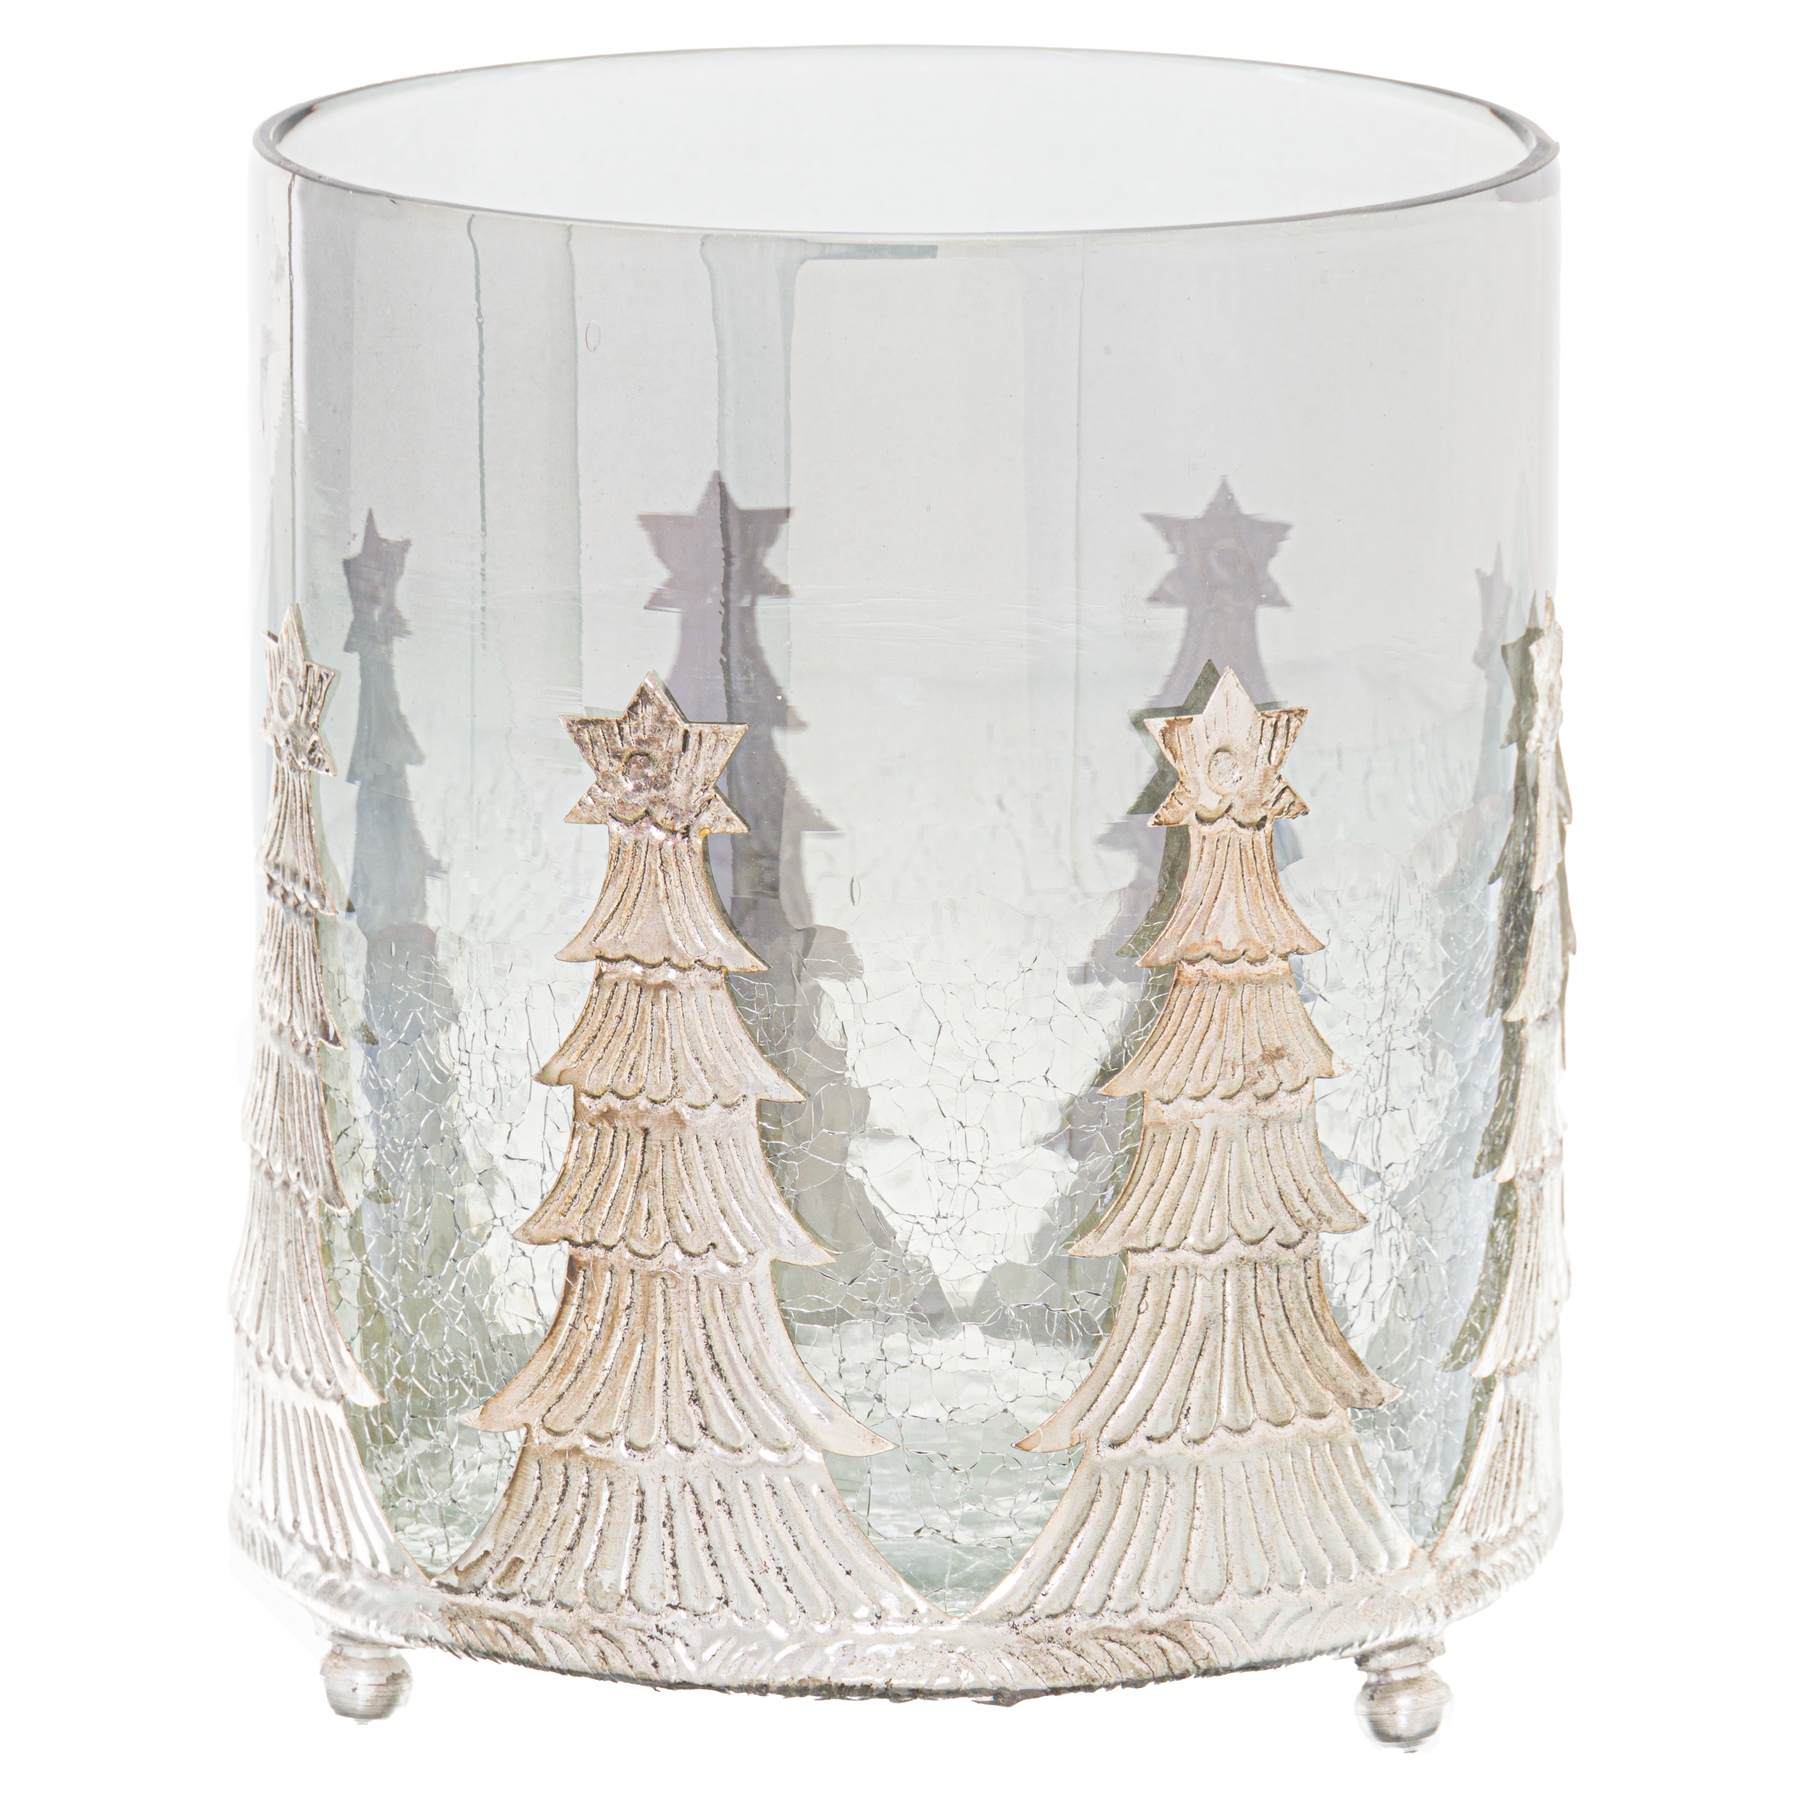 Noel Collection Midnight Medium Christmas Tree Candle Holder - Image 1